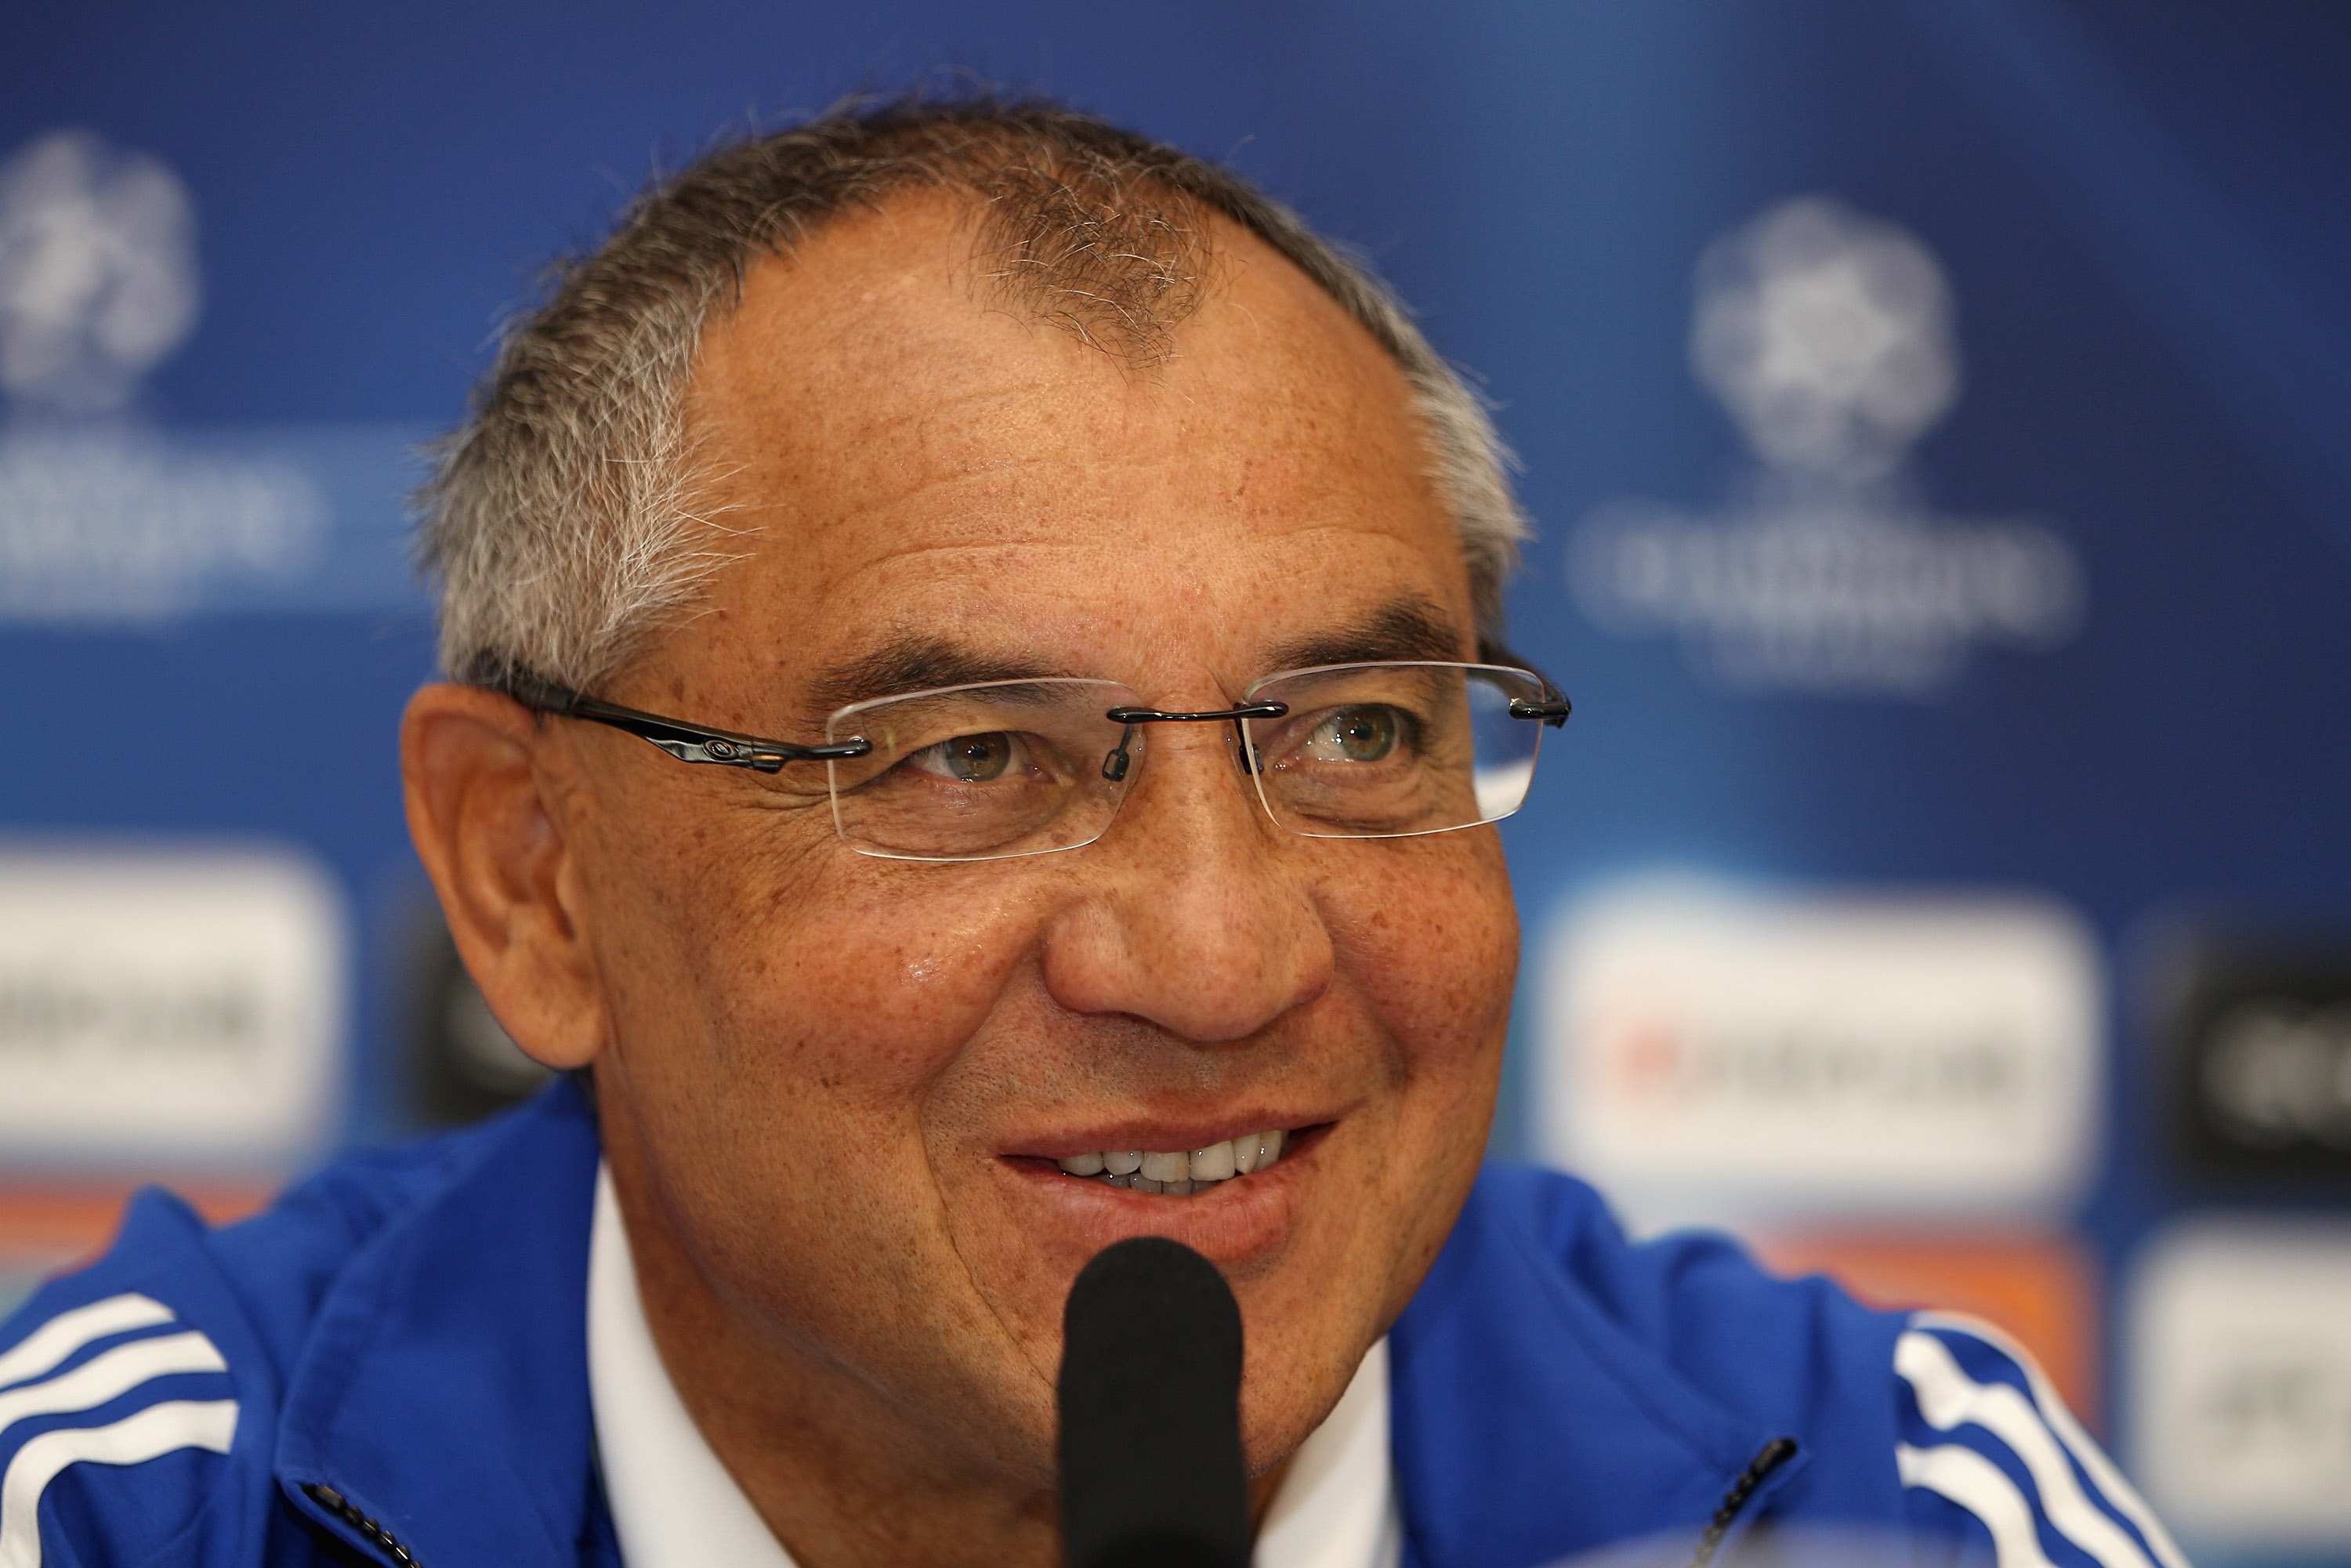 LYON, FRANCE - SEPTEMBER 13:  Schalke Head Coach Felix Magath smiles during the FC Schalke Press Conference, ahead of their Group B UEFA Champions League first phase match against Lyon, at Stade de Gerland  on September 13, 2010 in Lyon, France.  (Photo b